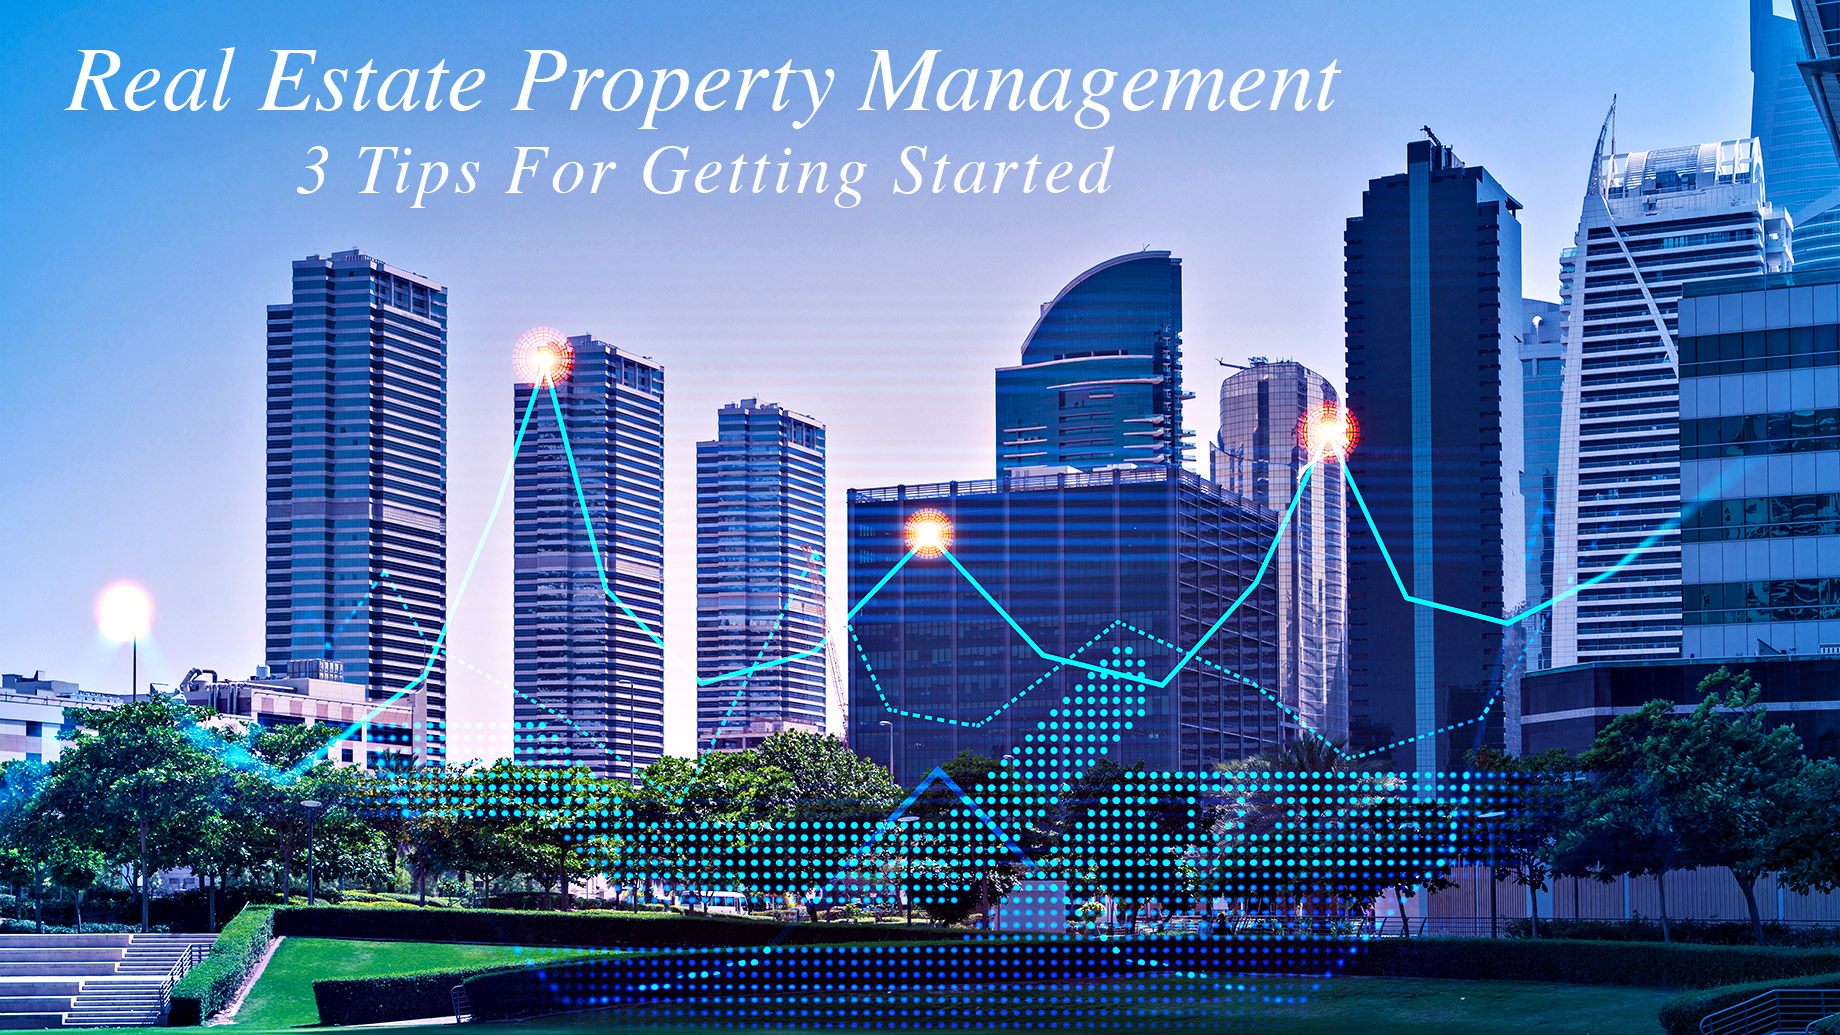 Real Estate Property Management - 3 Tips For Getting Started